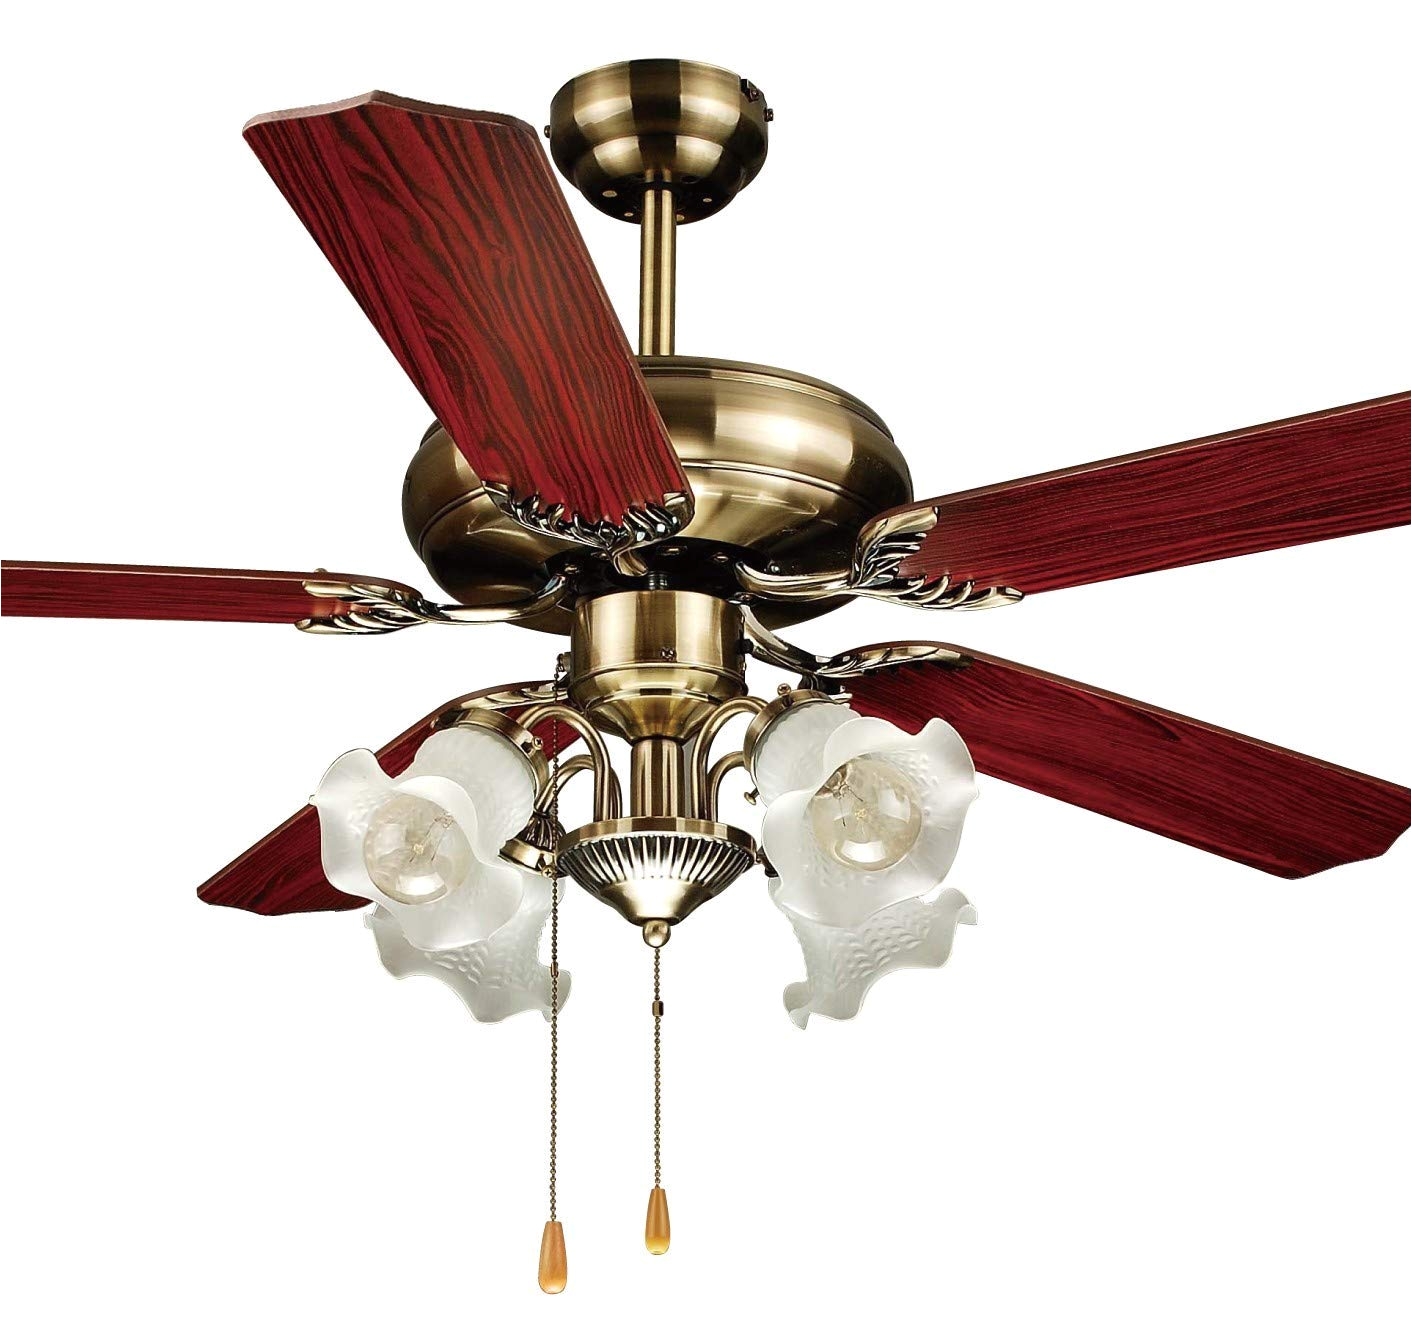 fj world d52026 elegant and classy ceiling fan with 5 blades 52 4 lights and free remote amazon com